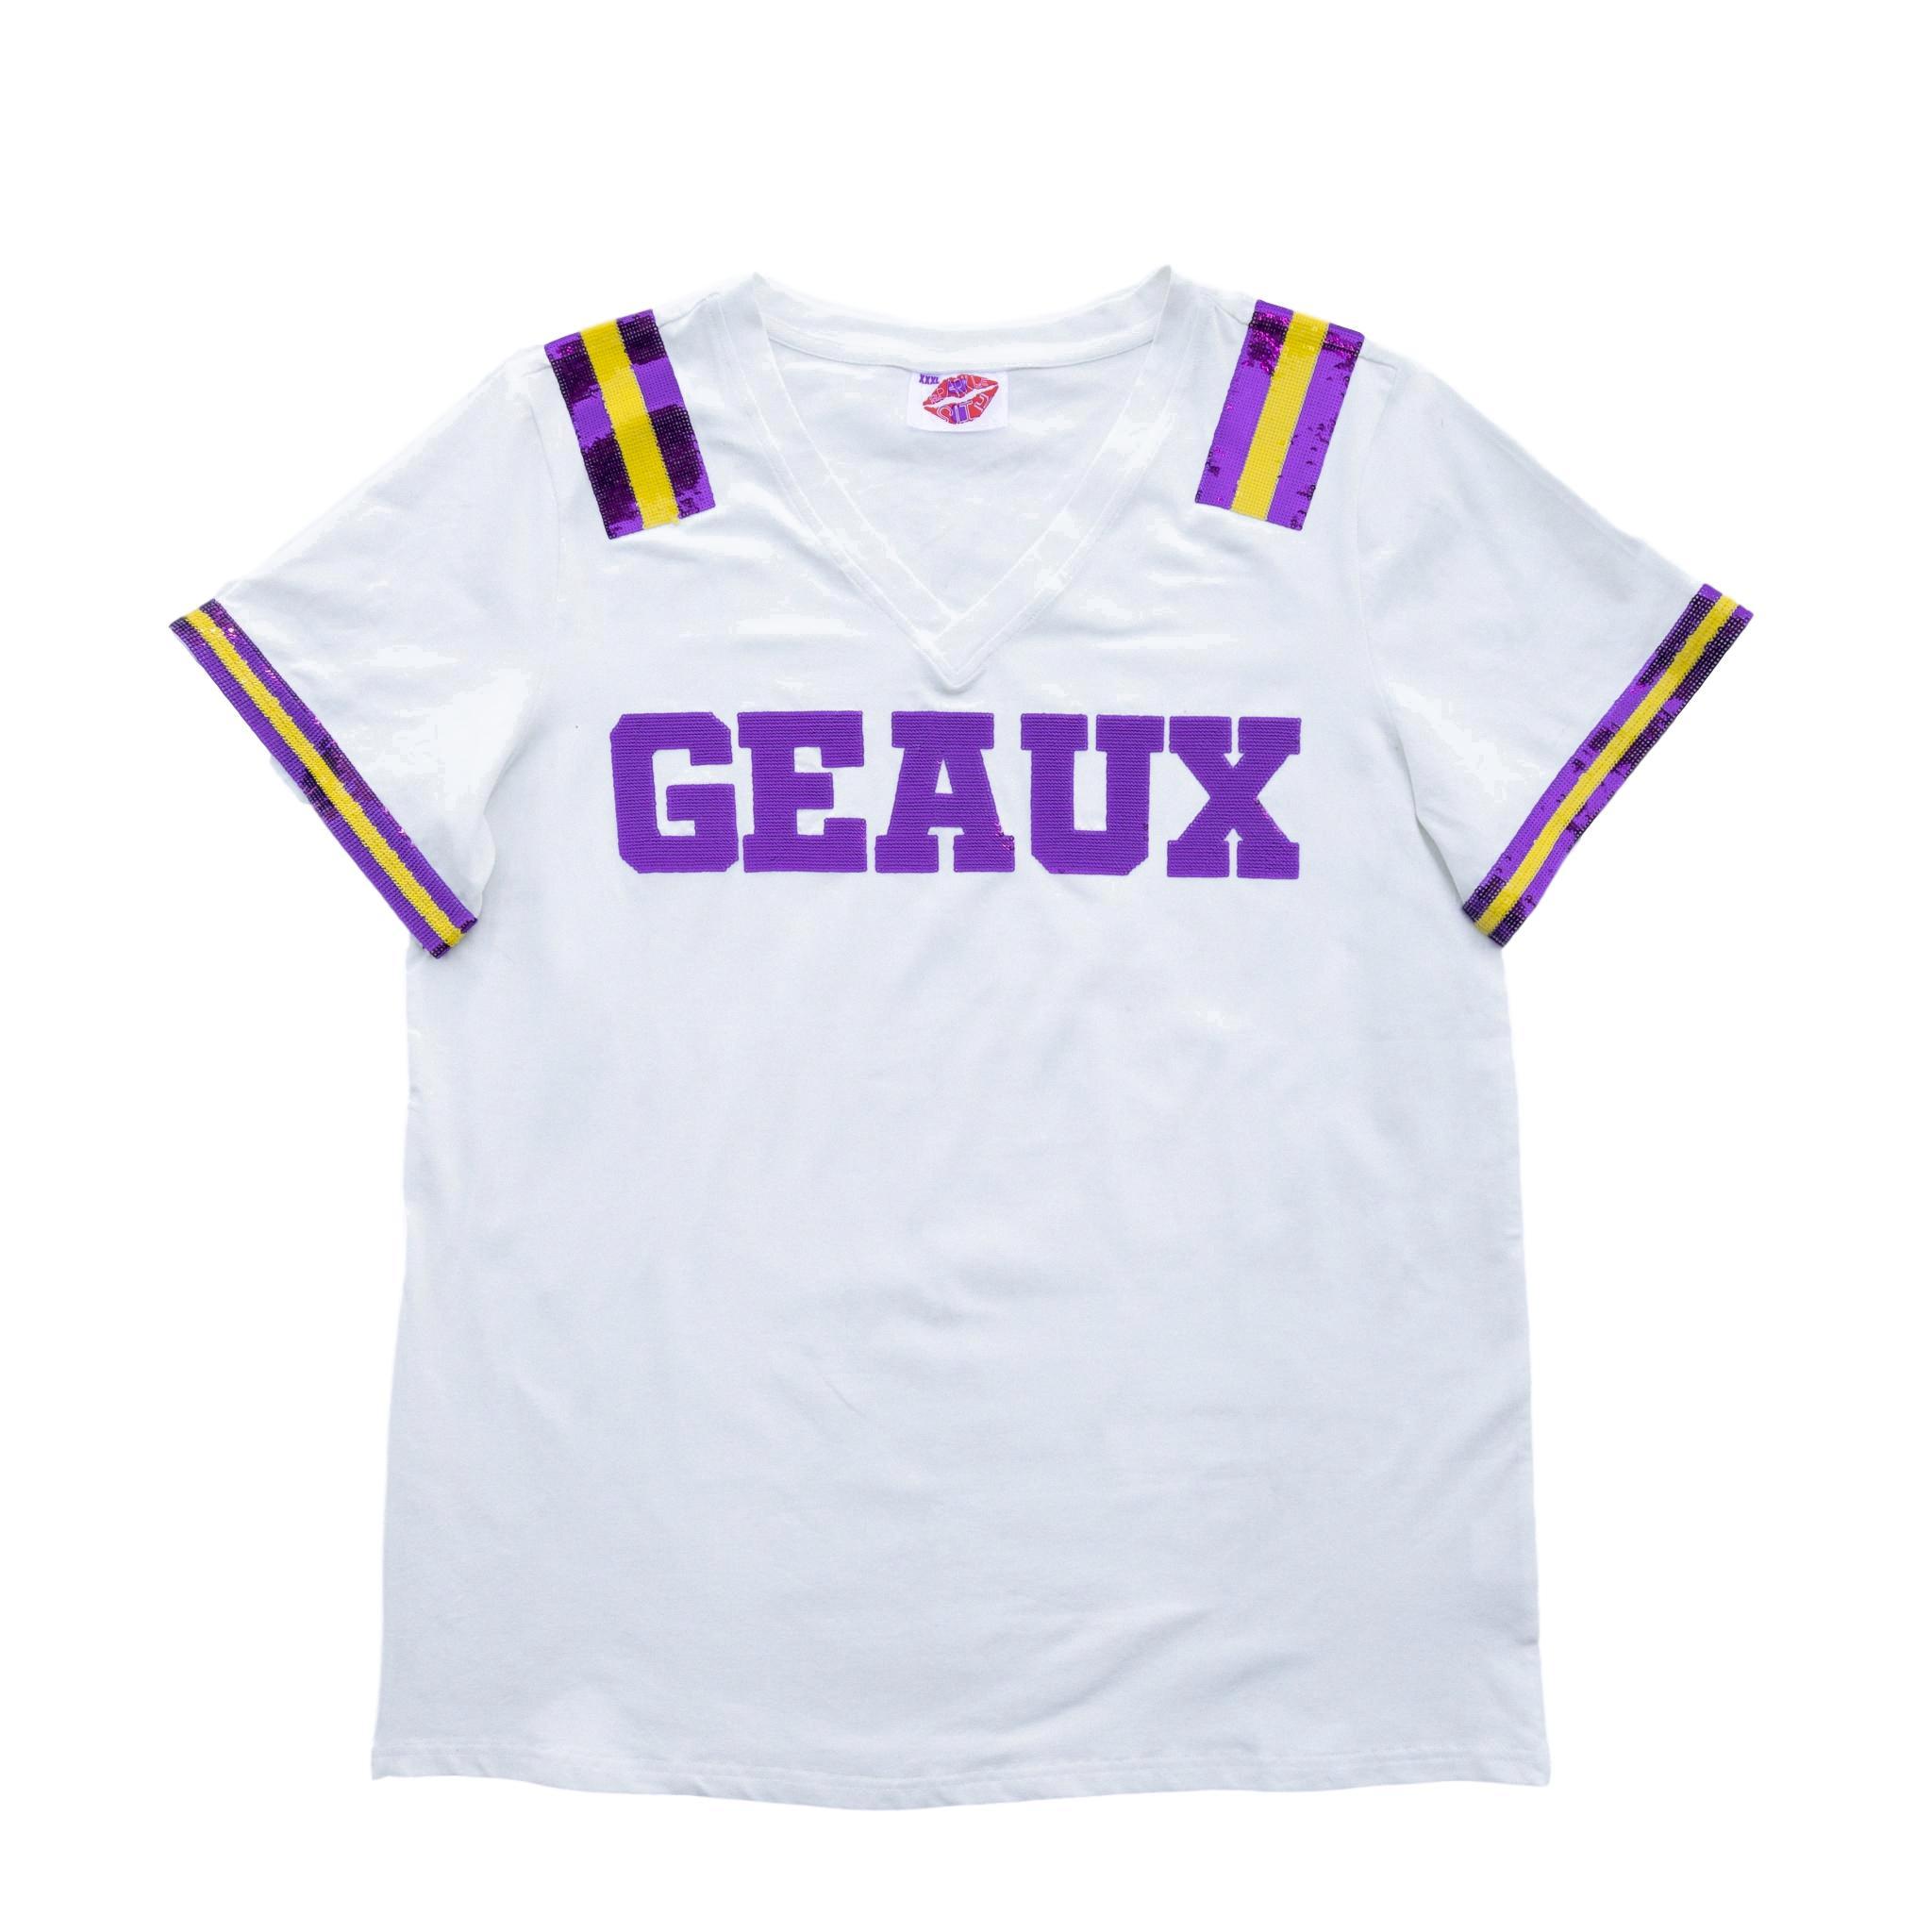 geaux meaning